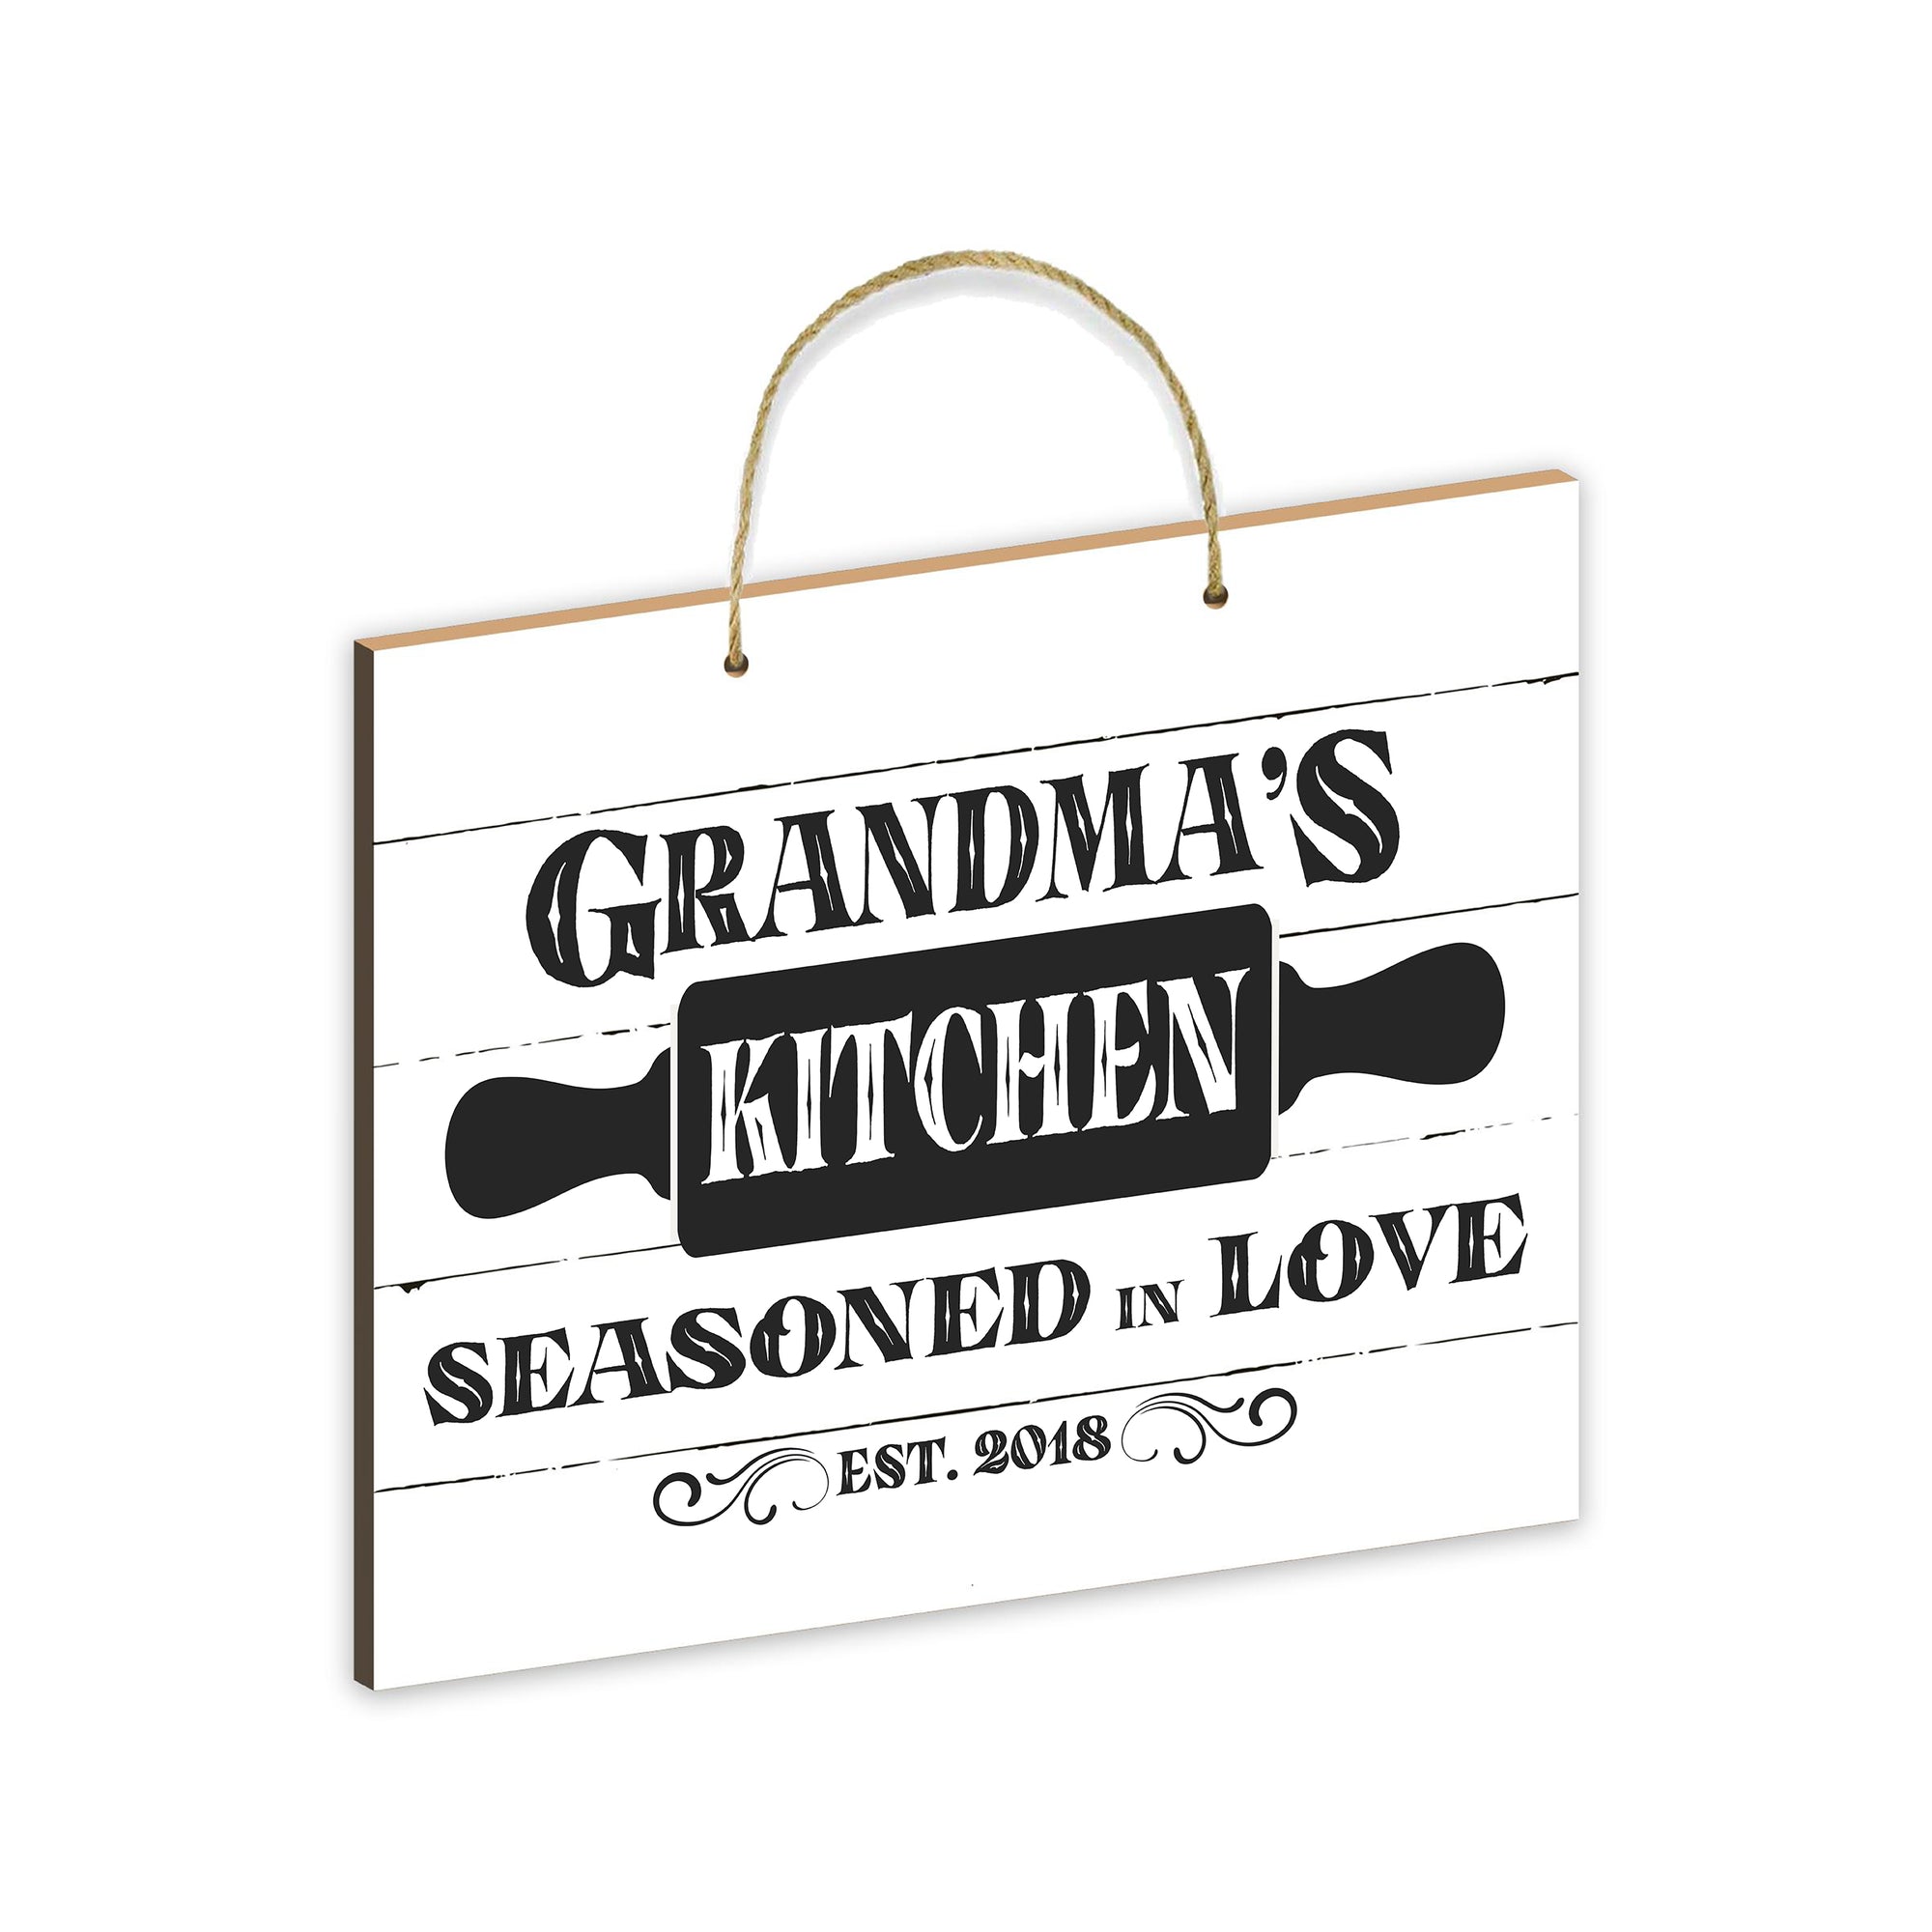 Rustic-Inspired Wooden Wall Hanging Rope Sign For Kitchen & Home Décor - Seasoned